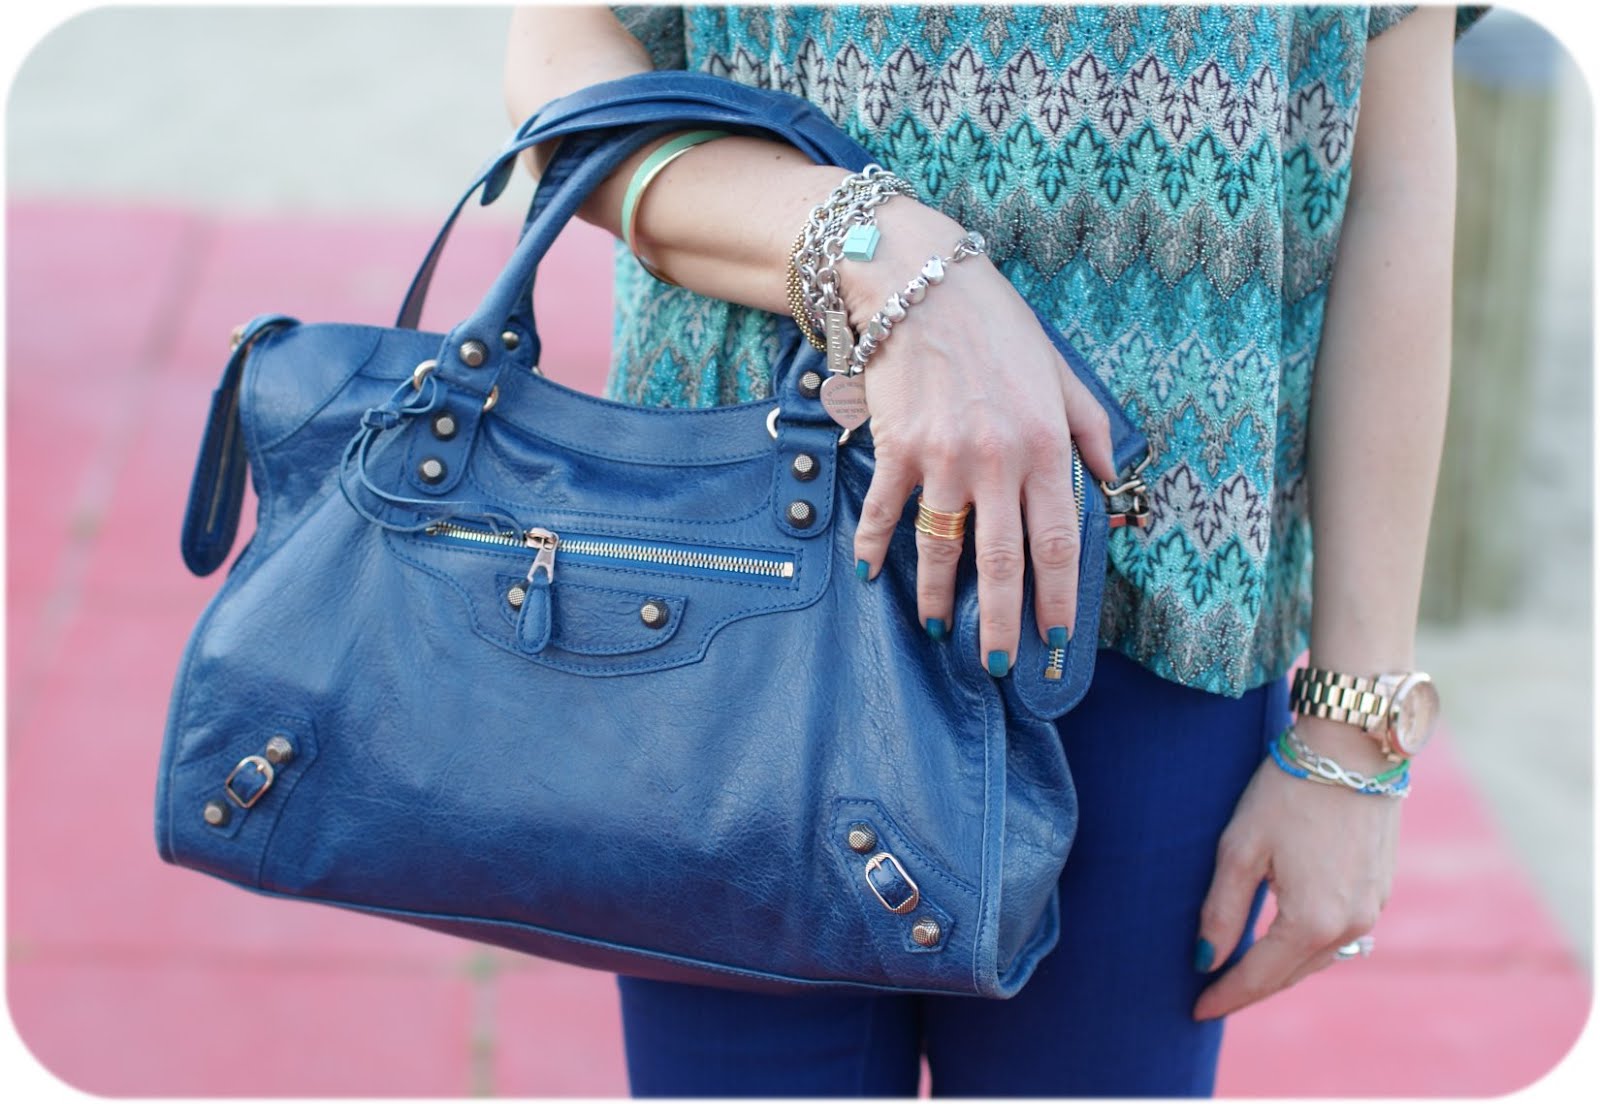 Fifty shades of blue | Fashion and Cookies - fashion and beauty blog